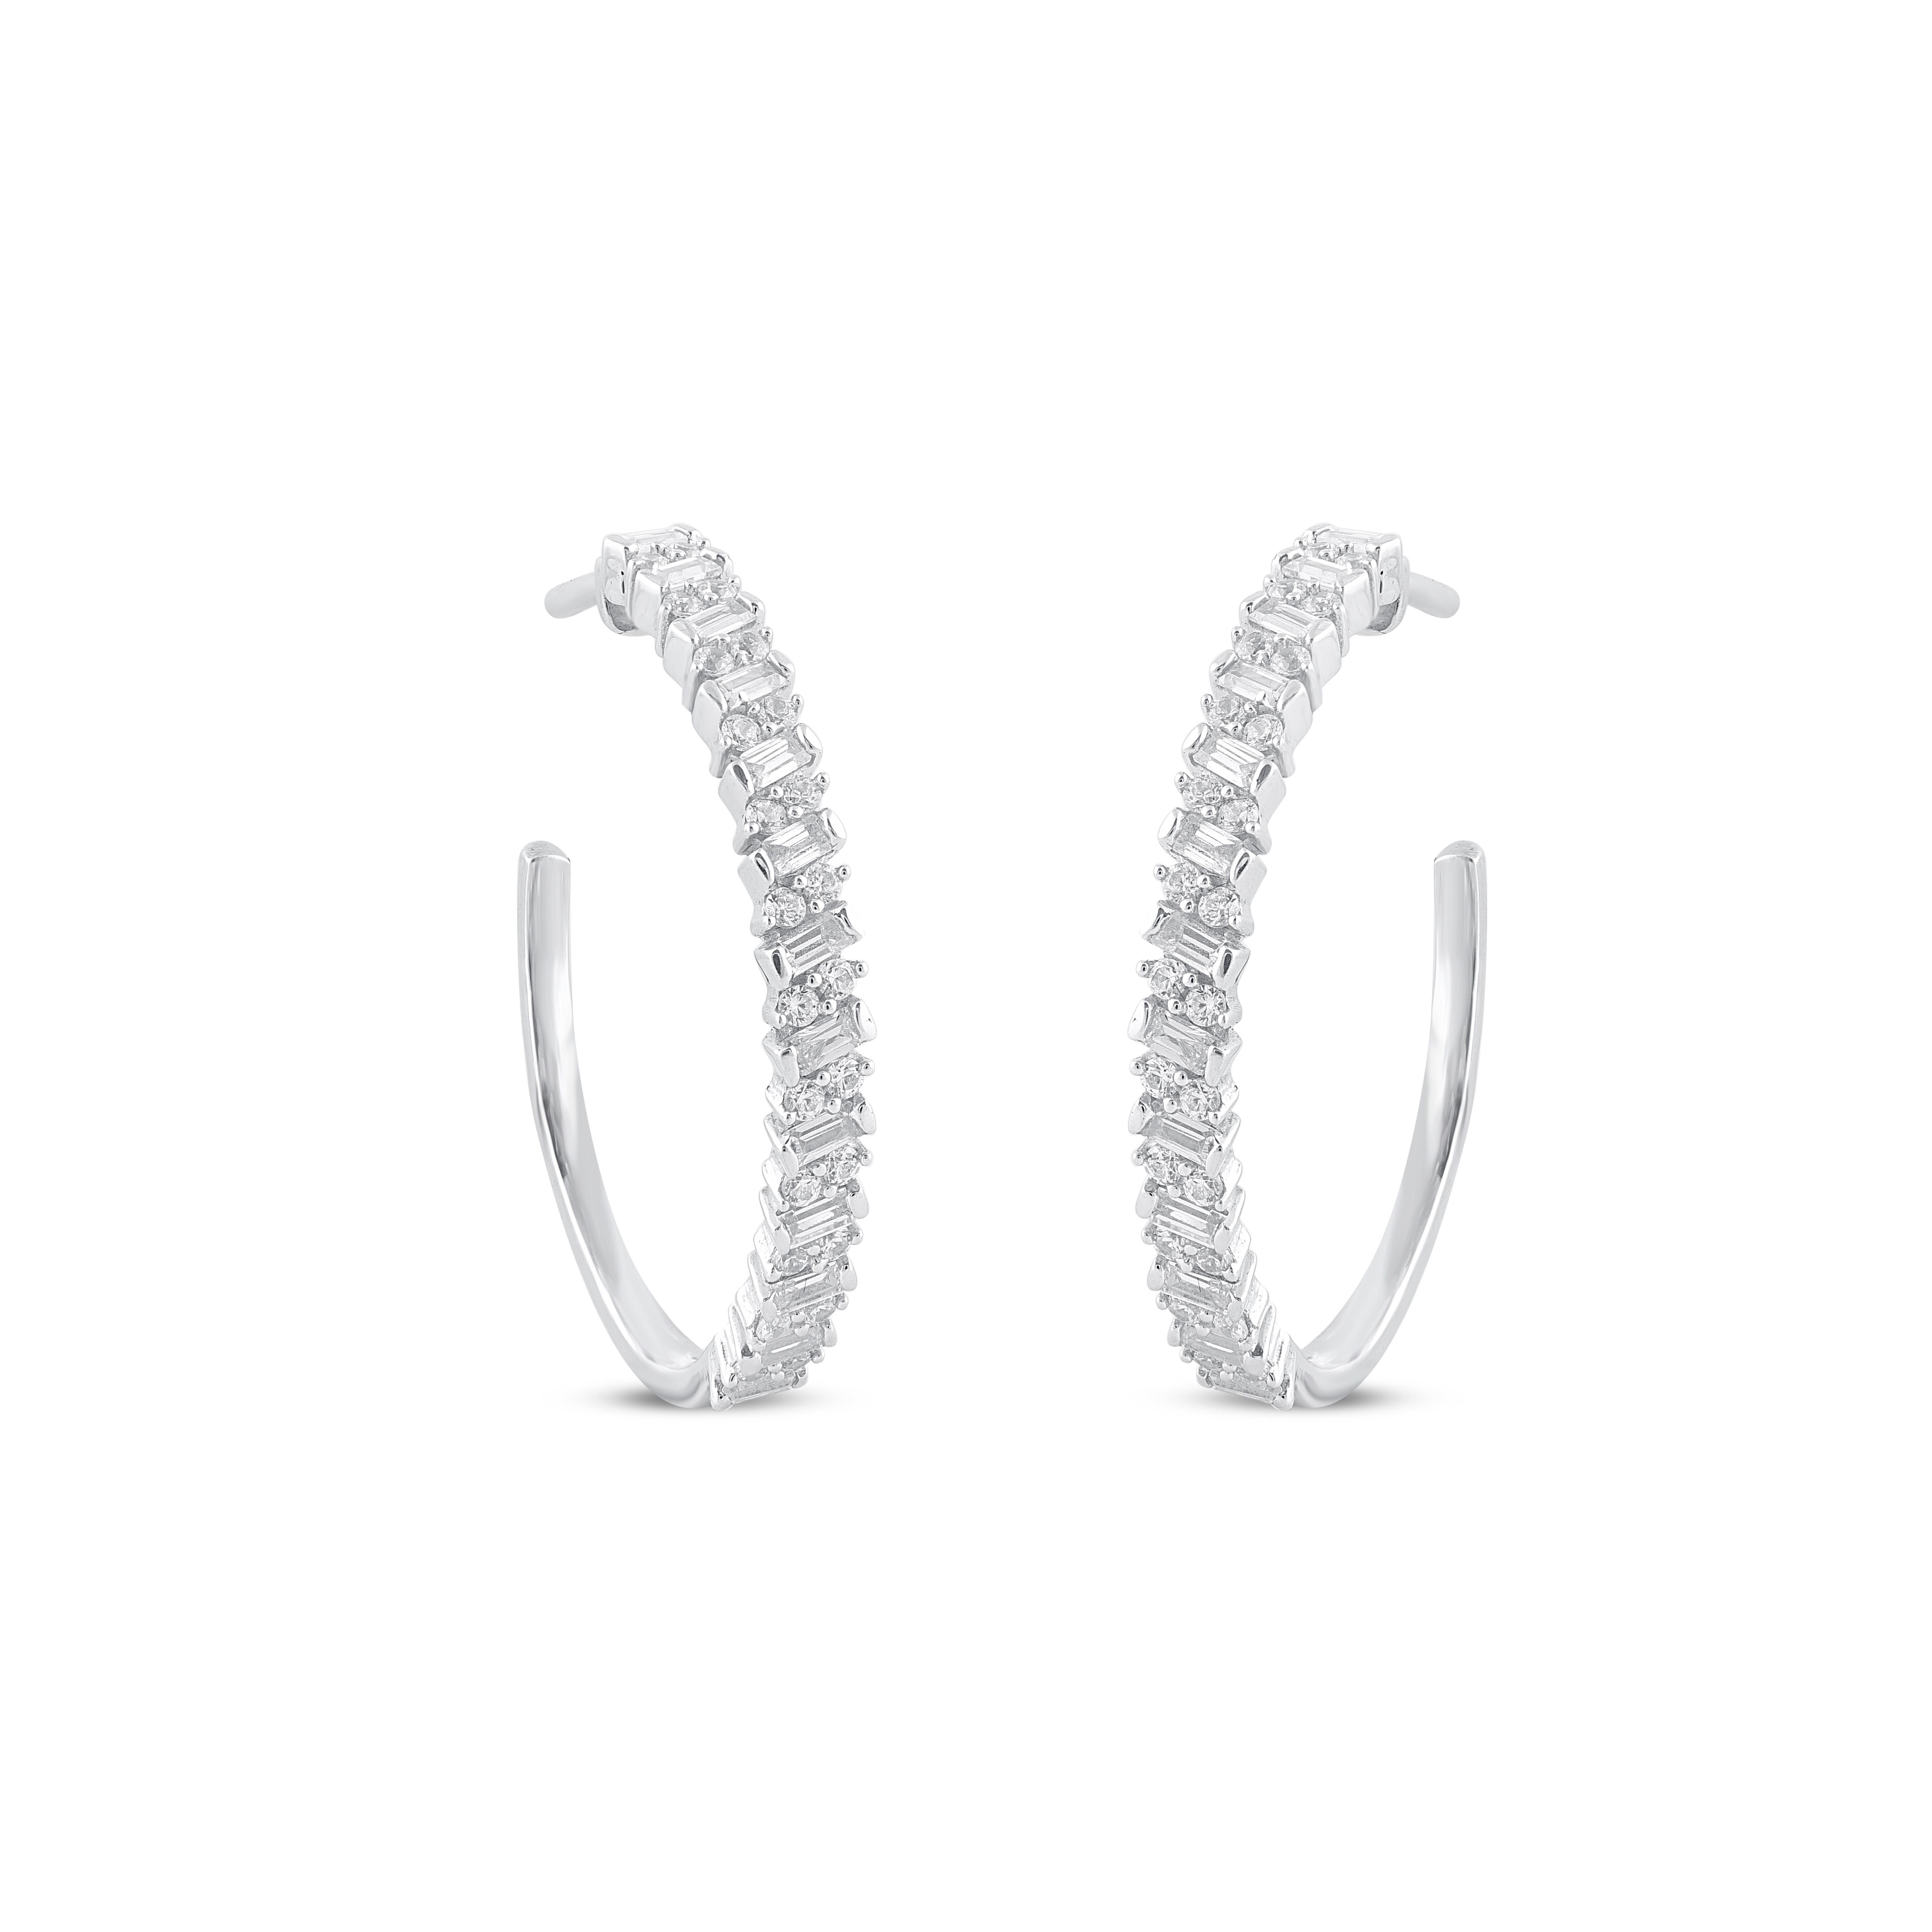 A sparkling delight, these diamond hoop earrings fit her charming aesthetic. Embellished with 48 round and 26 baguette diamond set in prong & channel setting, and dazzles with H-I color I2 clarity. Captivating with 1.00 Carat and secures comfortably